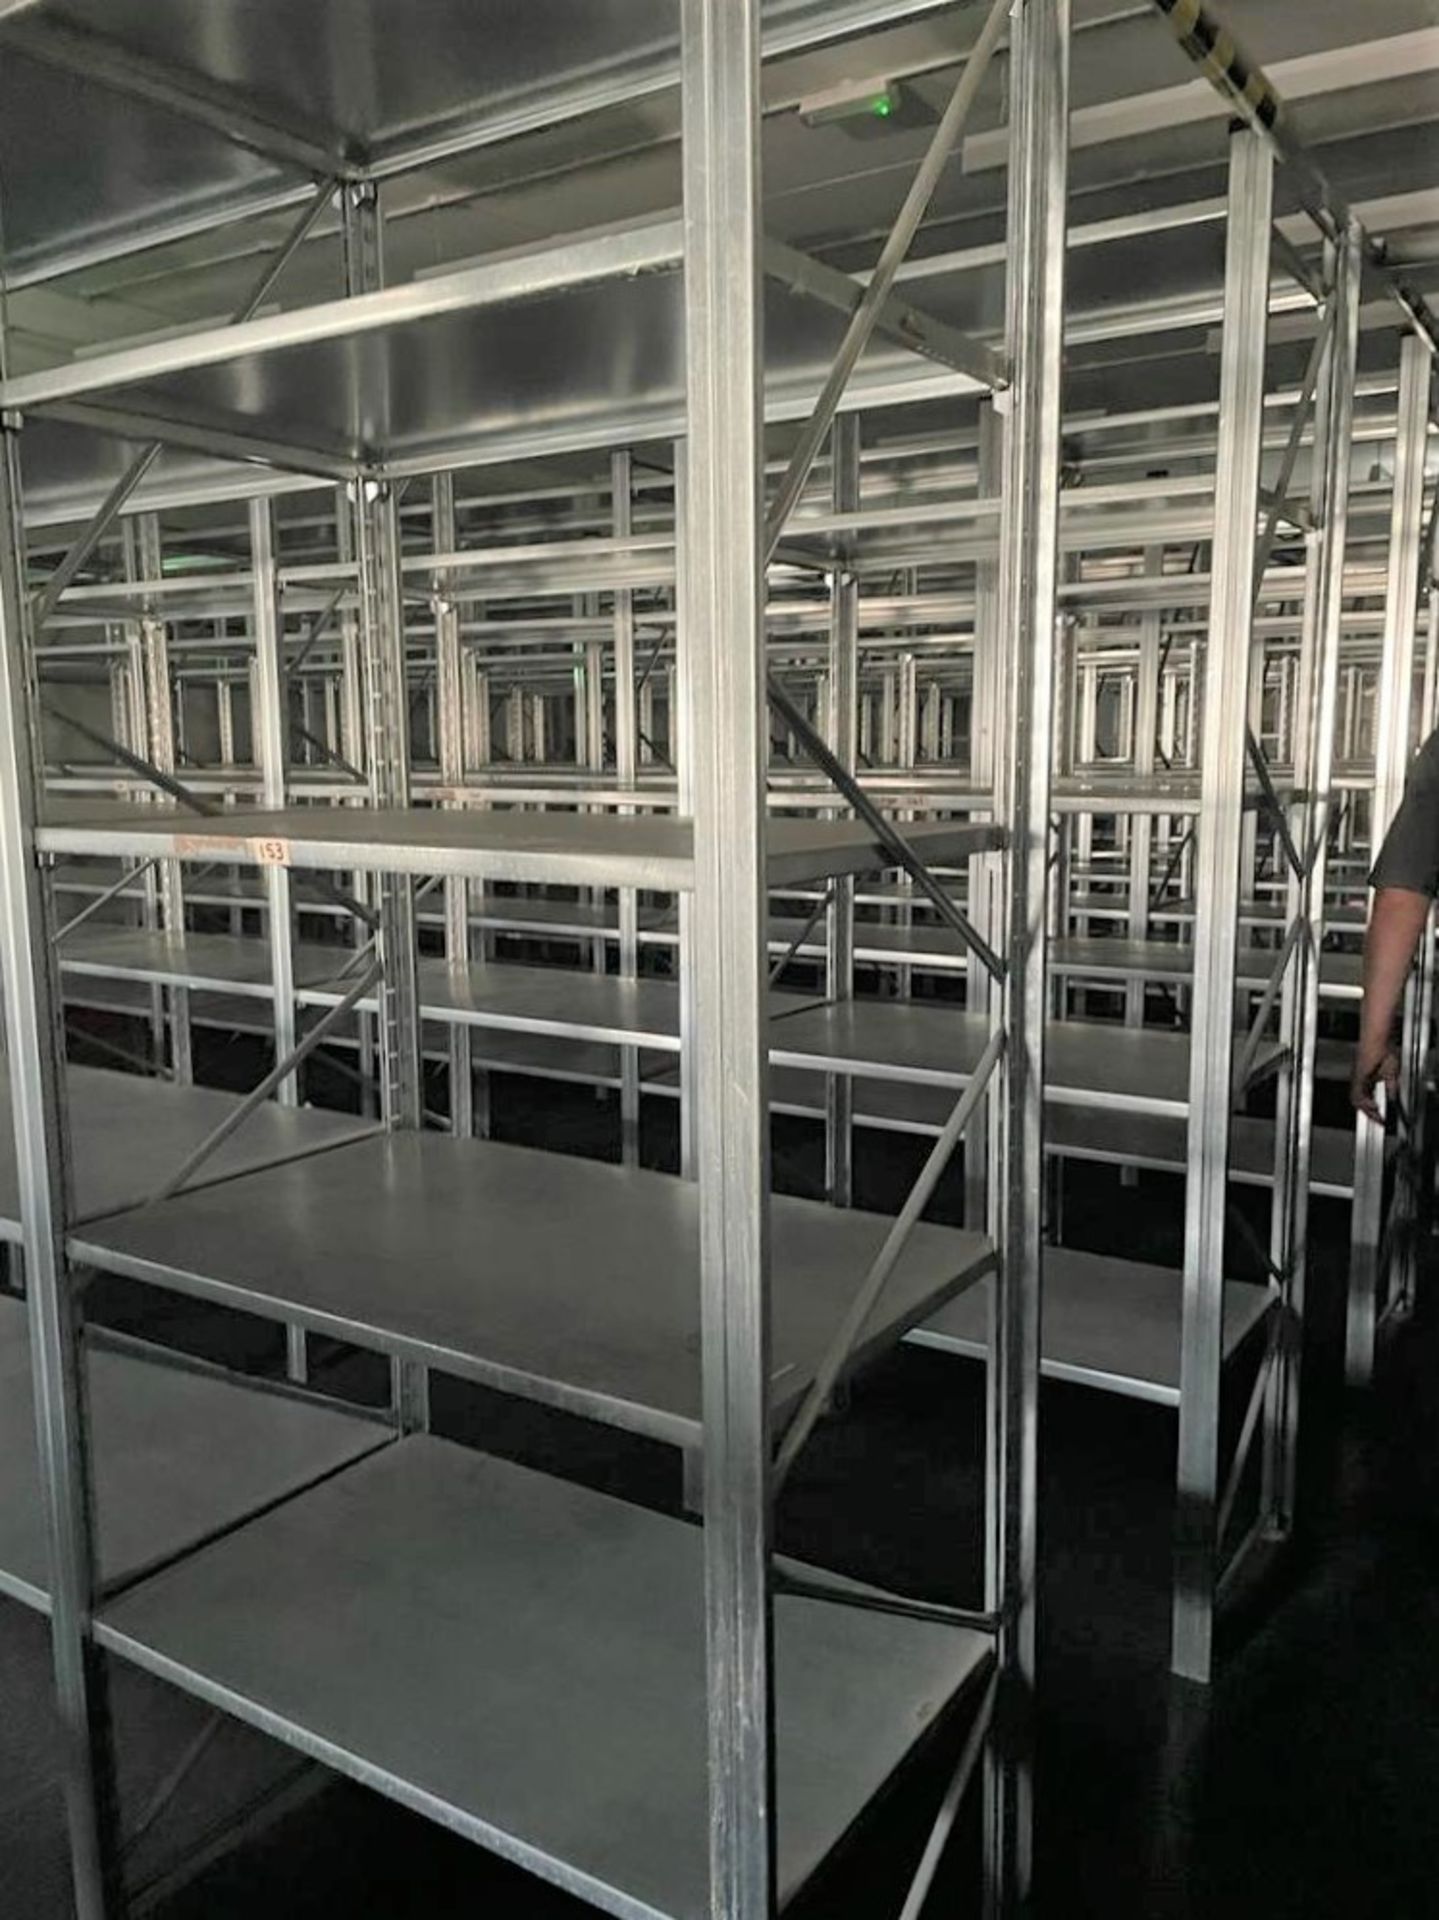 10 x Bays of High Quality Galvanised Steel Warehouse Shelving - Bay Dimensions: H250 x W100 x D60 - Image 3 of 12